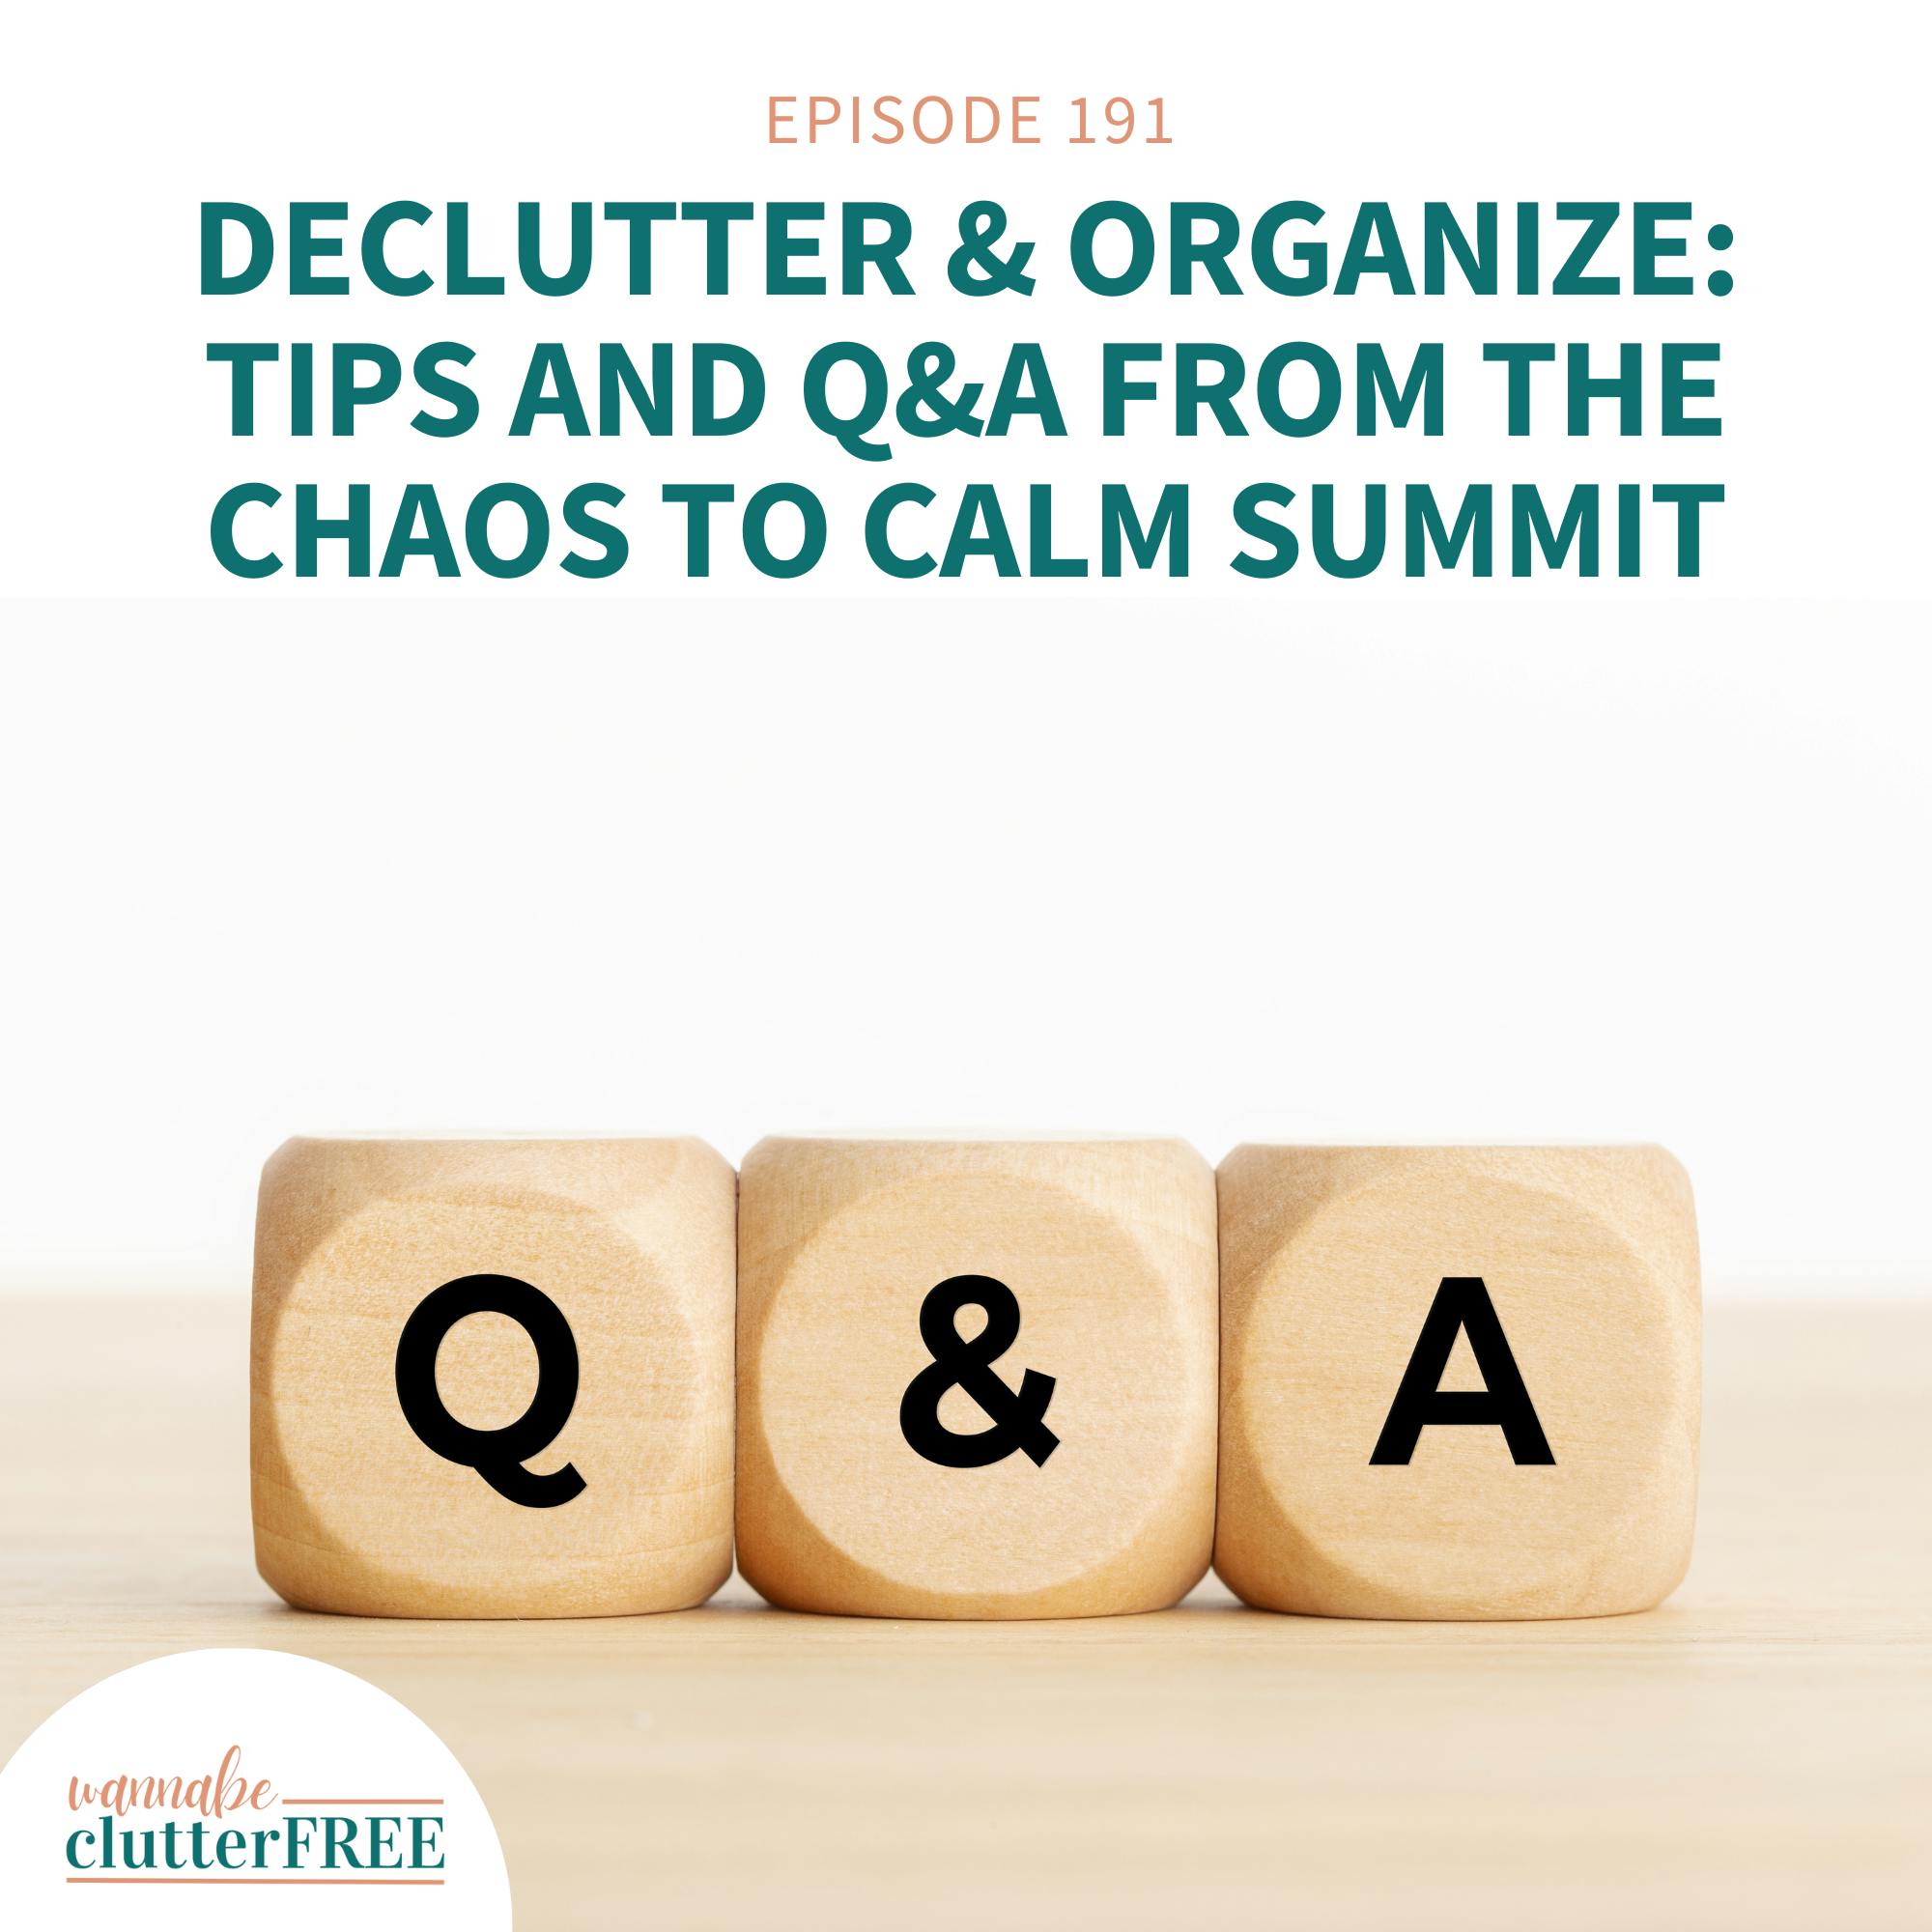 Ep 191: Declutter & Organize: Tips and Q&A from the Chaos to Calm Summit